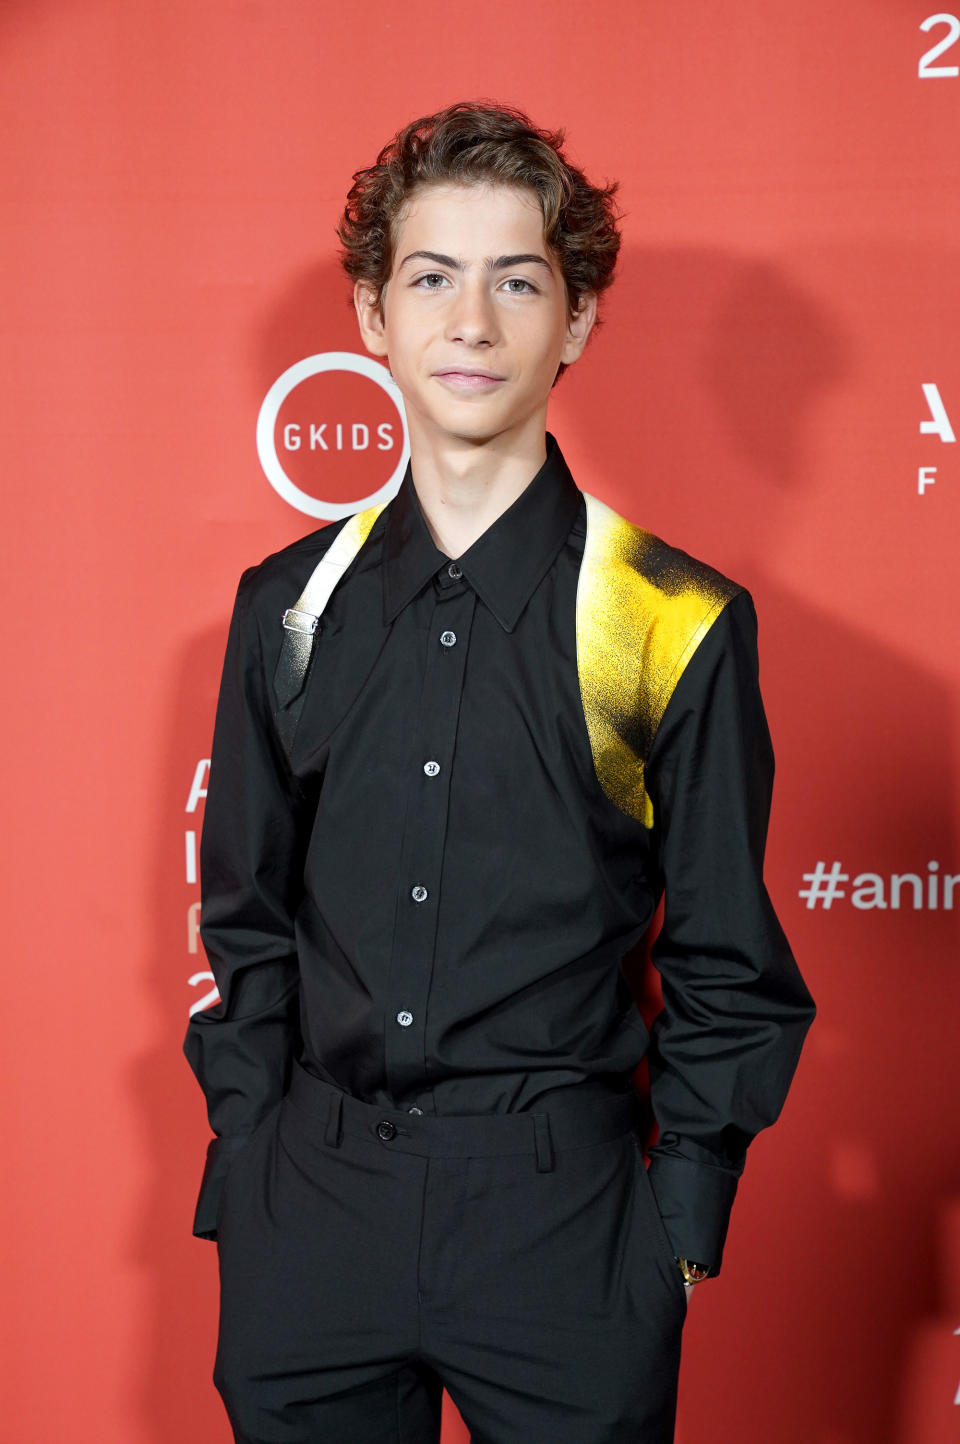 Jacob posing for photographers at a red carpet event with his hands in his pockets